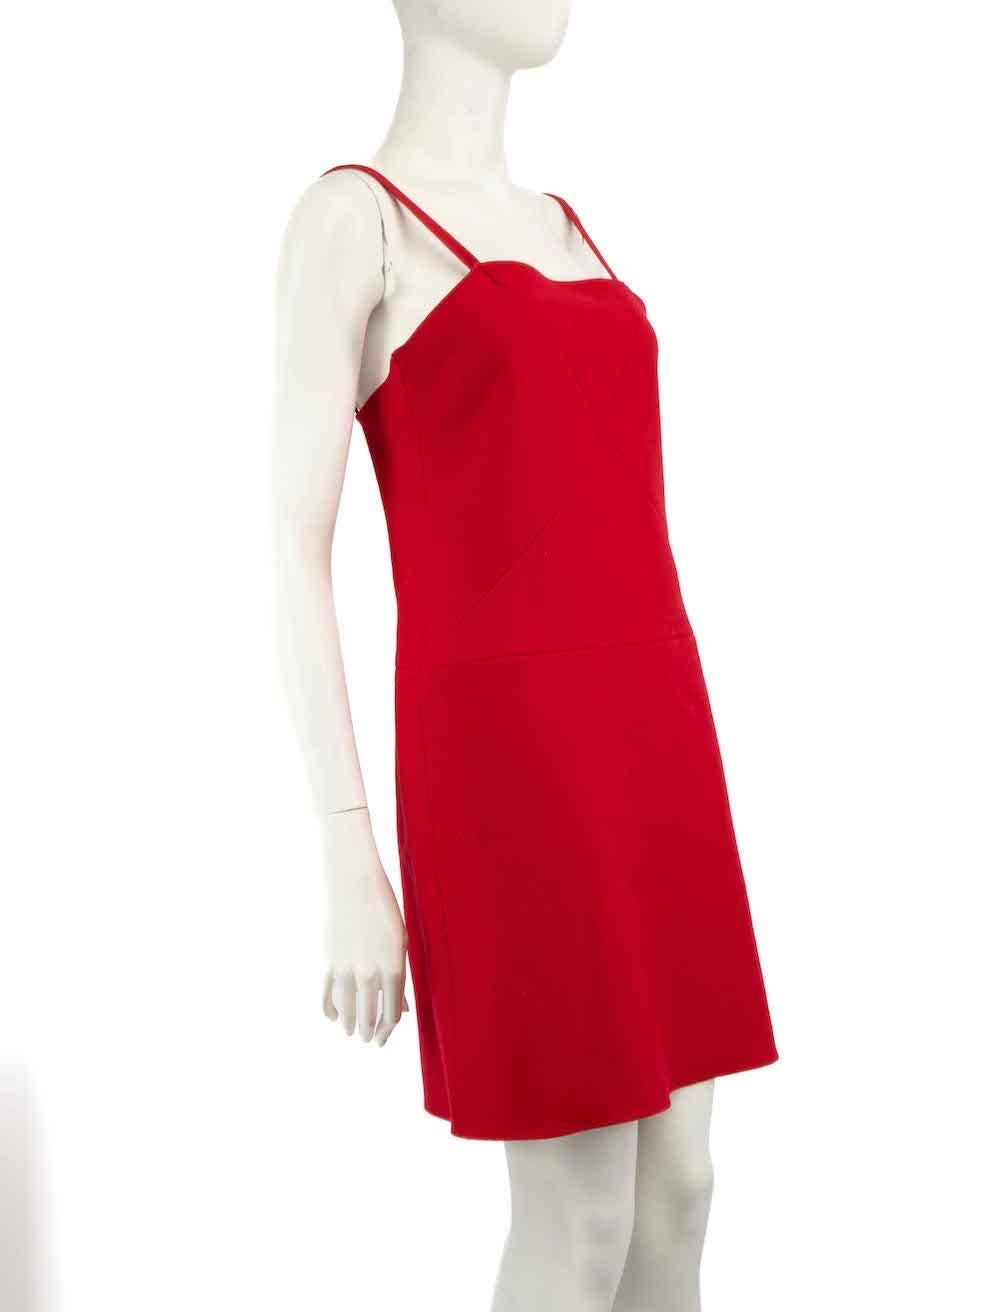 CONDITION is Good. Minor wear to dress is evident. Light wear to the front with a dark mark and thinning to the weave above the hem on this used Miu Miu designer resale item.
 
 Details
 Red
 Wool
 Mini dress
 Square neckline
 Felted texture
